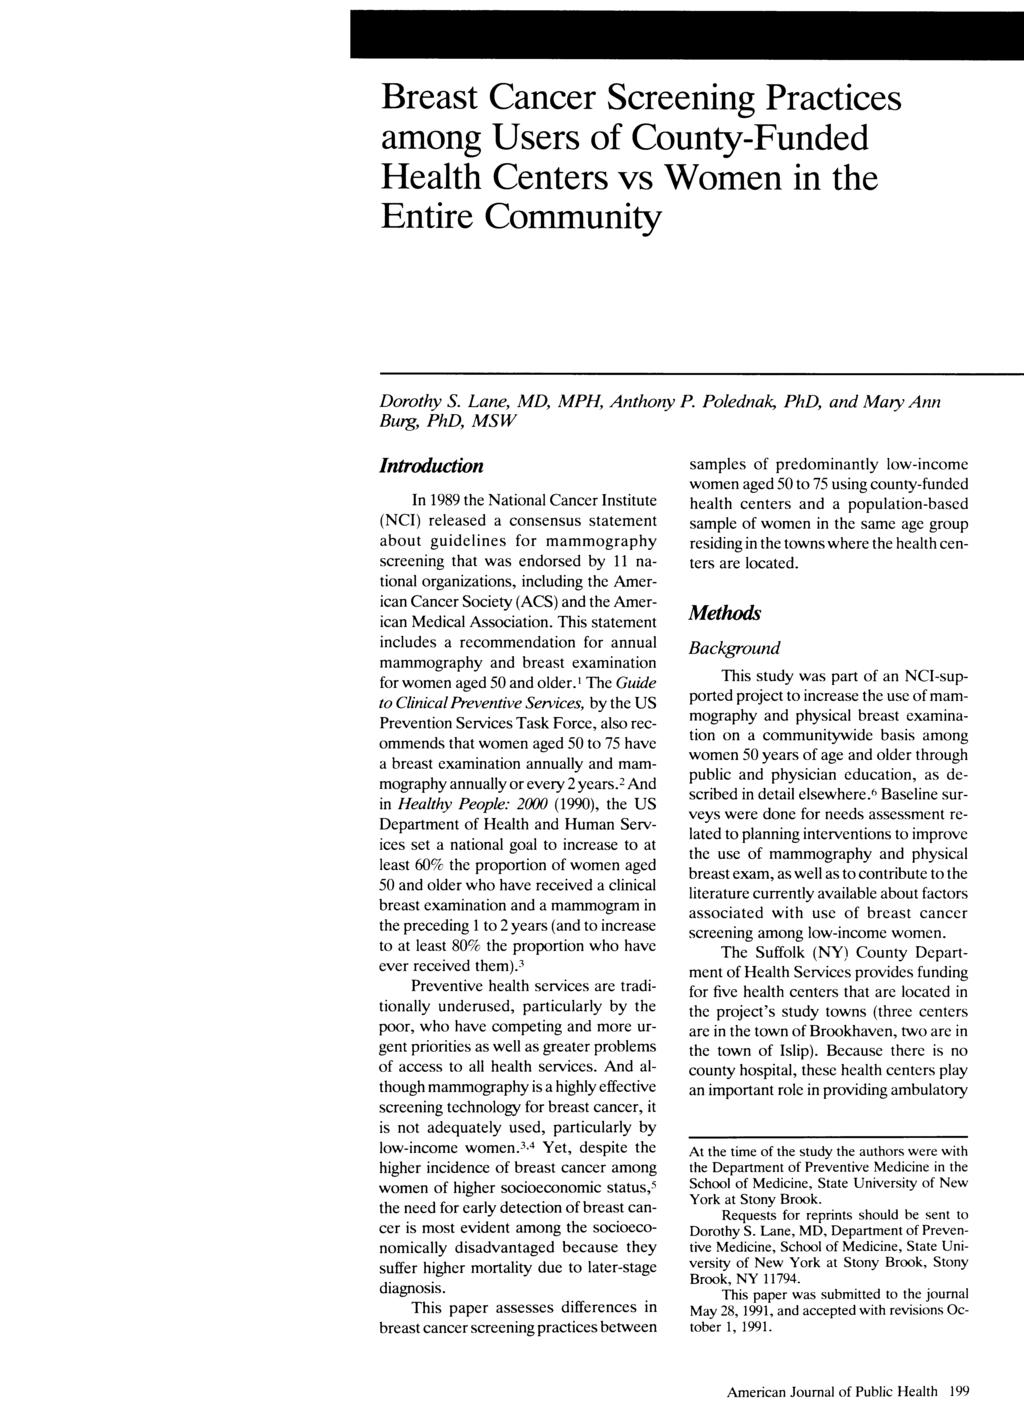 Breast Cancer Screening Practices among Users of County-Funded Health Centers vs Women in the Entire Community... Dorothy S. Lane, MD, MPH, Anthony P.